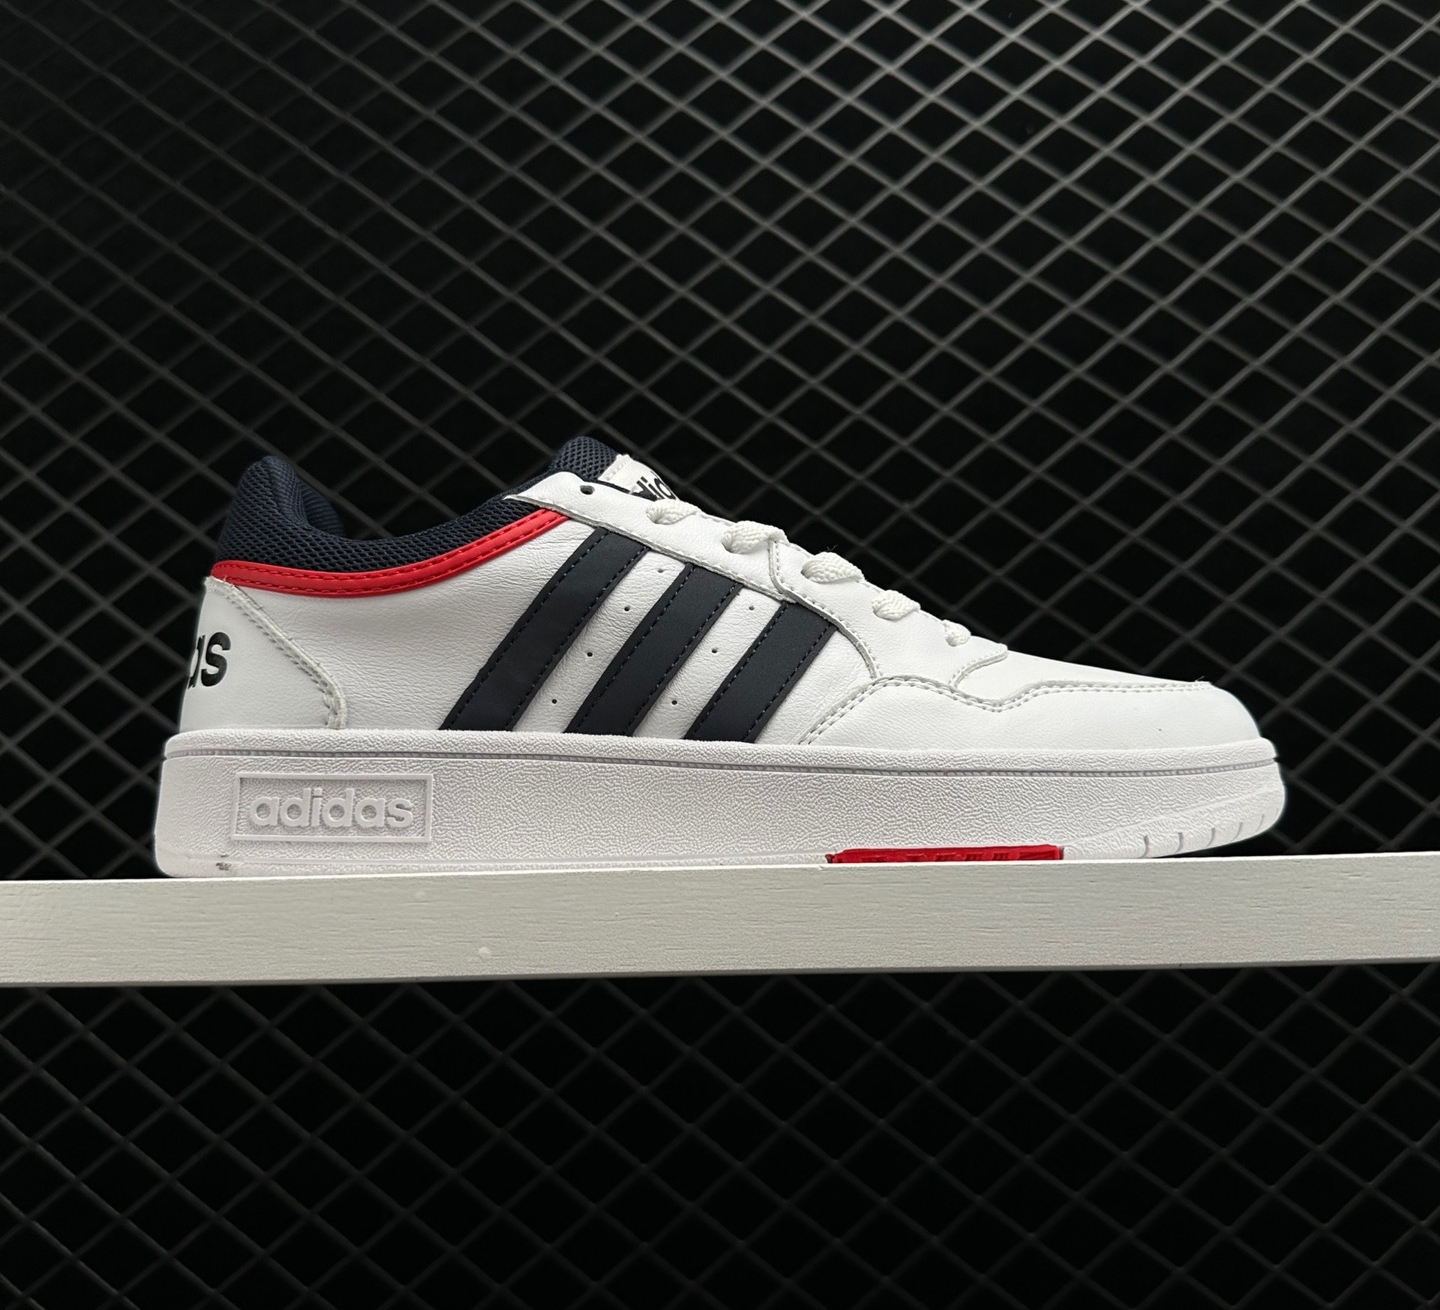 Adidas Hoops 3.0 Low Classic Vintage Shoes 'White Vivid Red' GY5427 - Stylish Retro Footwear